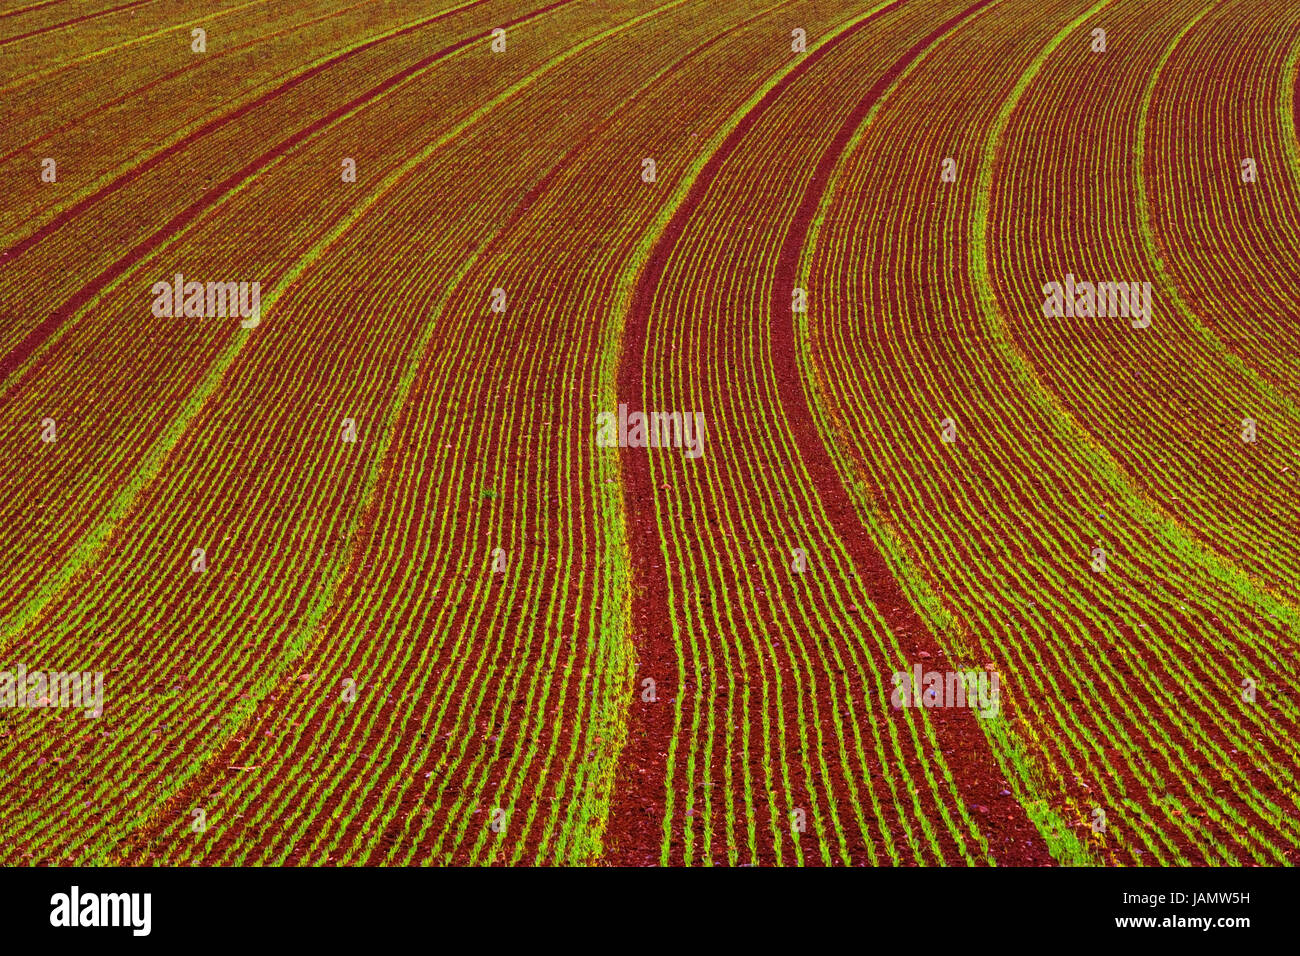 Field,seedlings,[M],economy,agriculture,field economy,agriculture,annex,cultivation,plants,little plants,instincts,small,young,useful plants,samples,series,sowing series,lines,green,red,colours,curved,bend,growth,nobody,background, Stock Photo